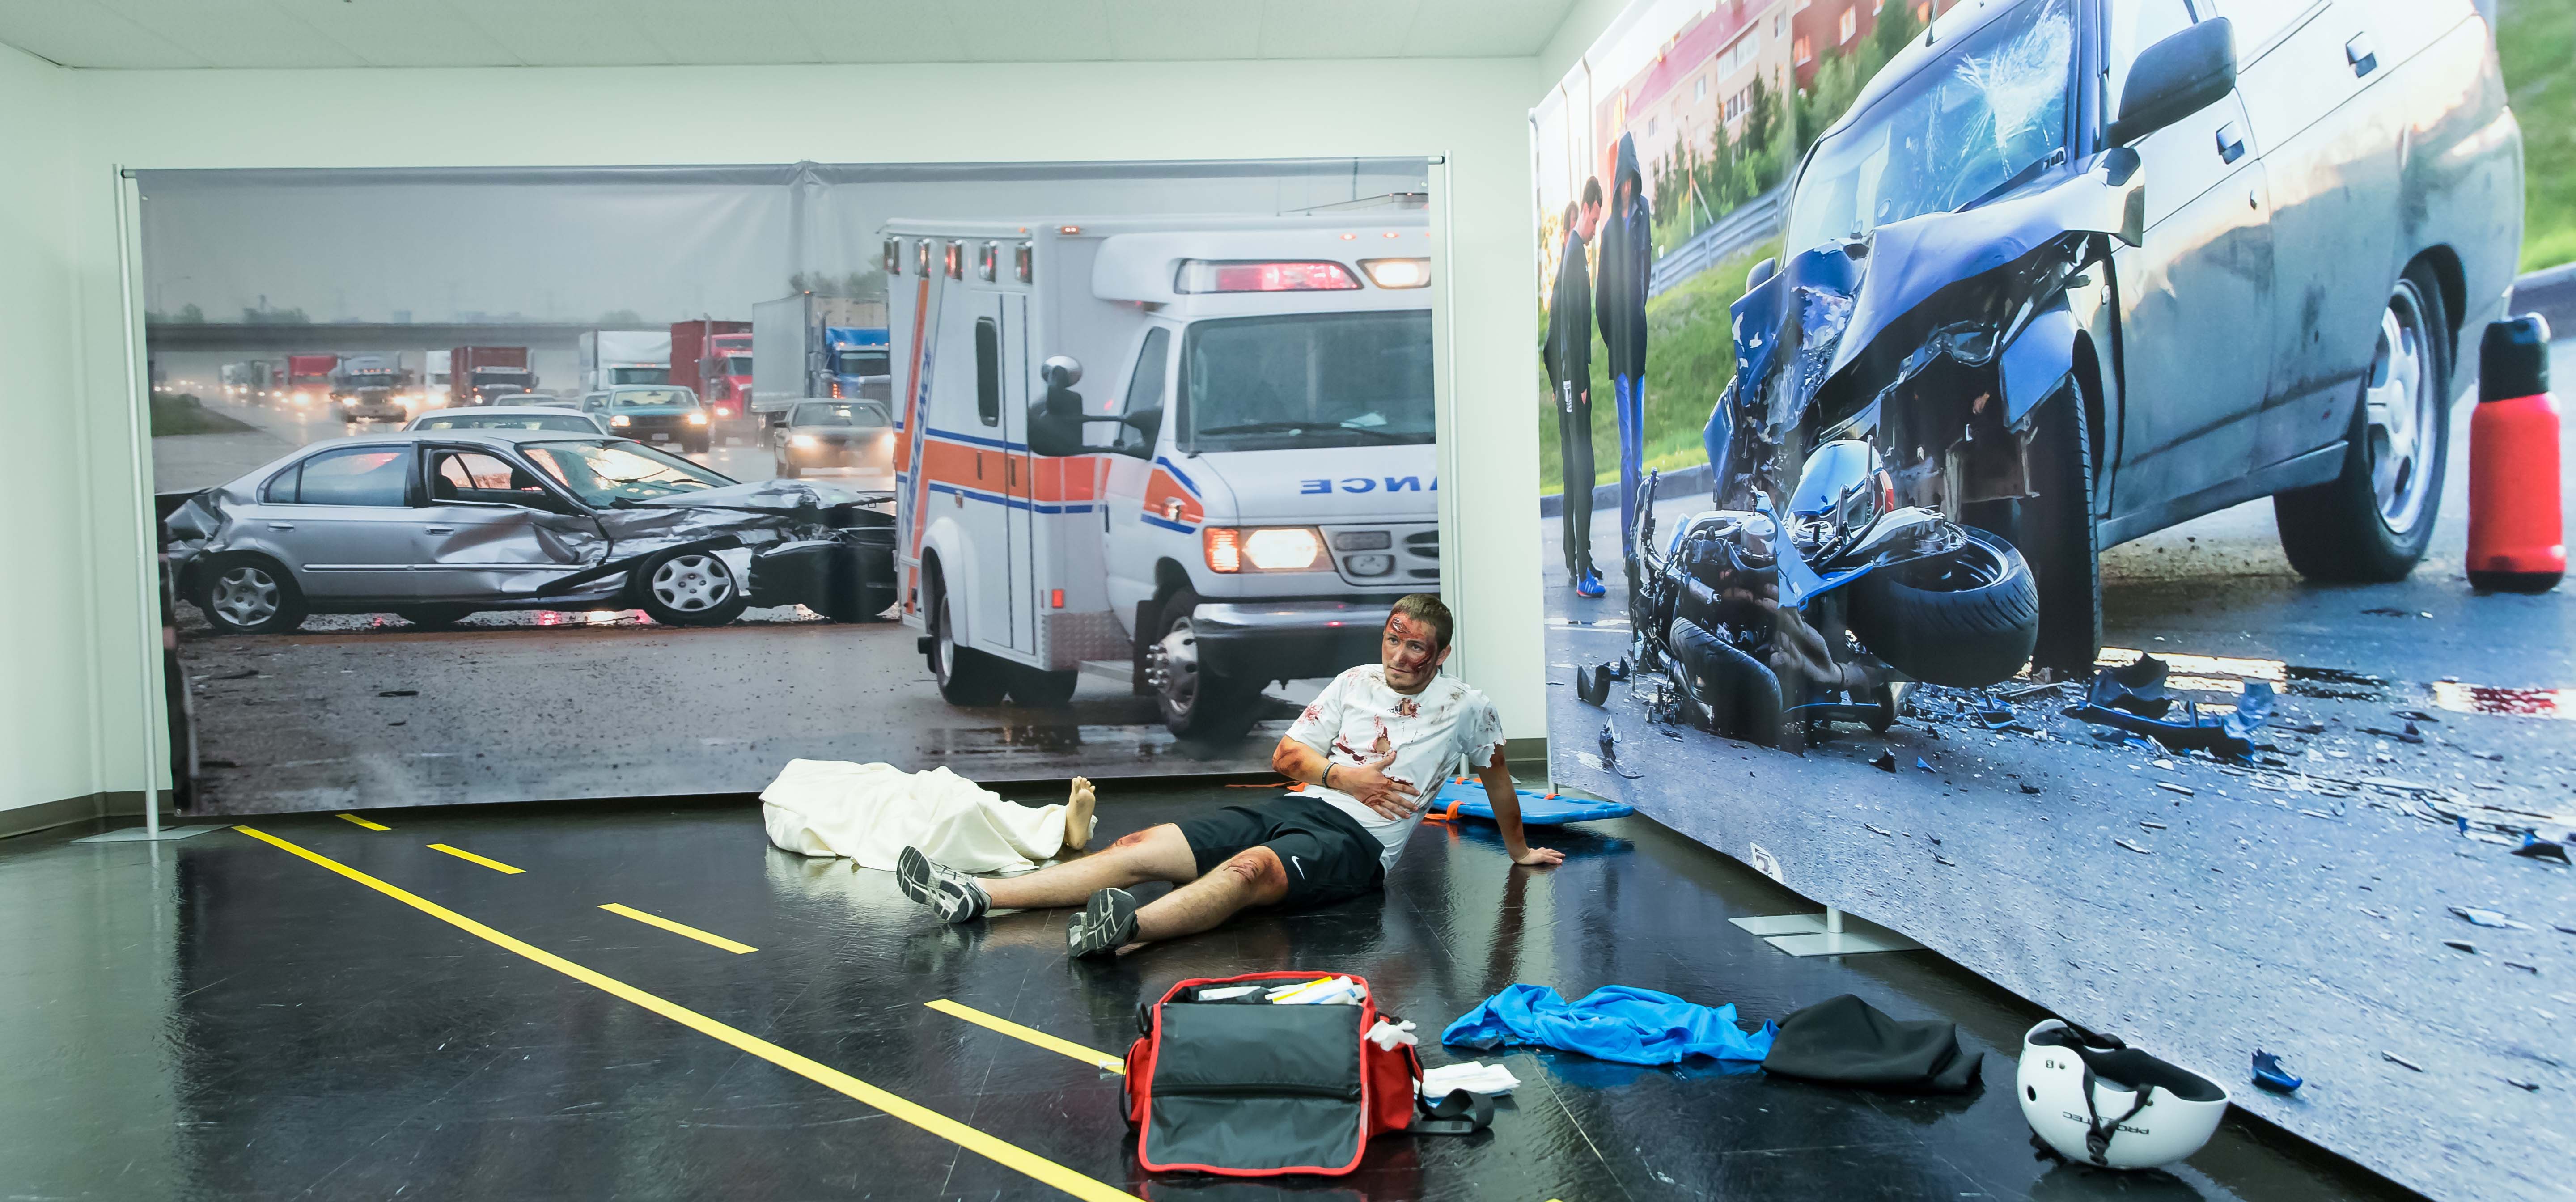 A simulated patient on the floor. 